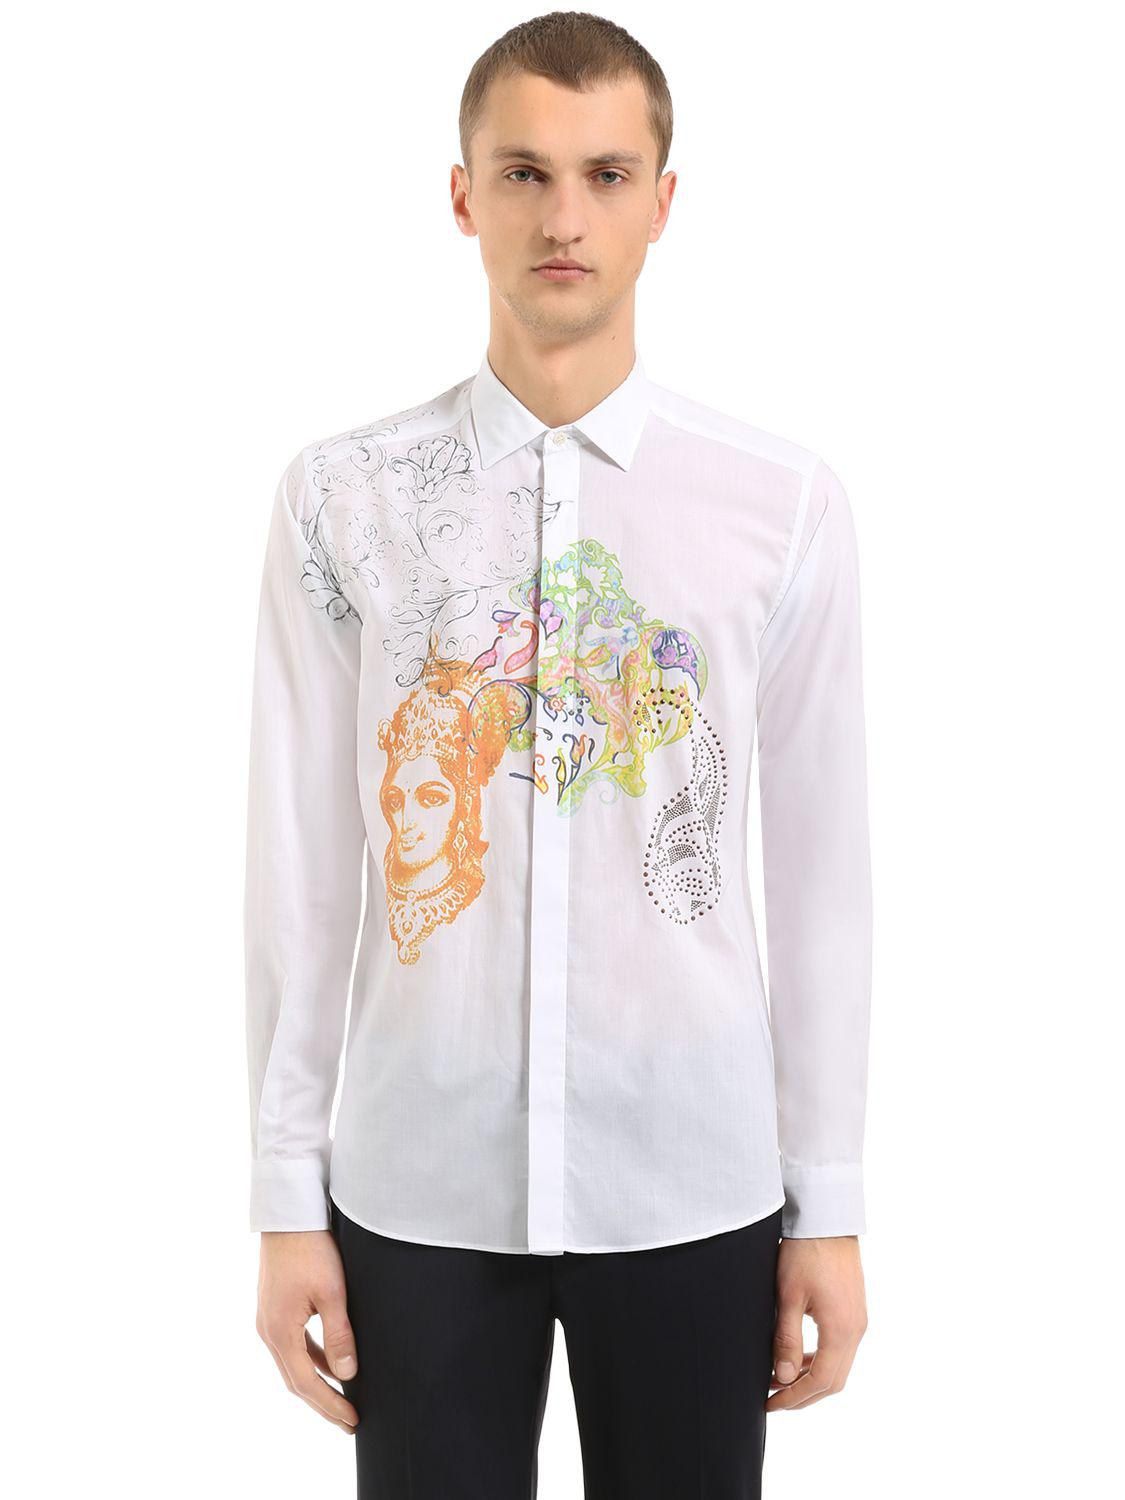 Etro Printed & Studded Cotton Muslin Shirt in White for Men - Lyst